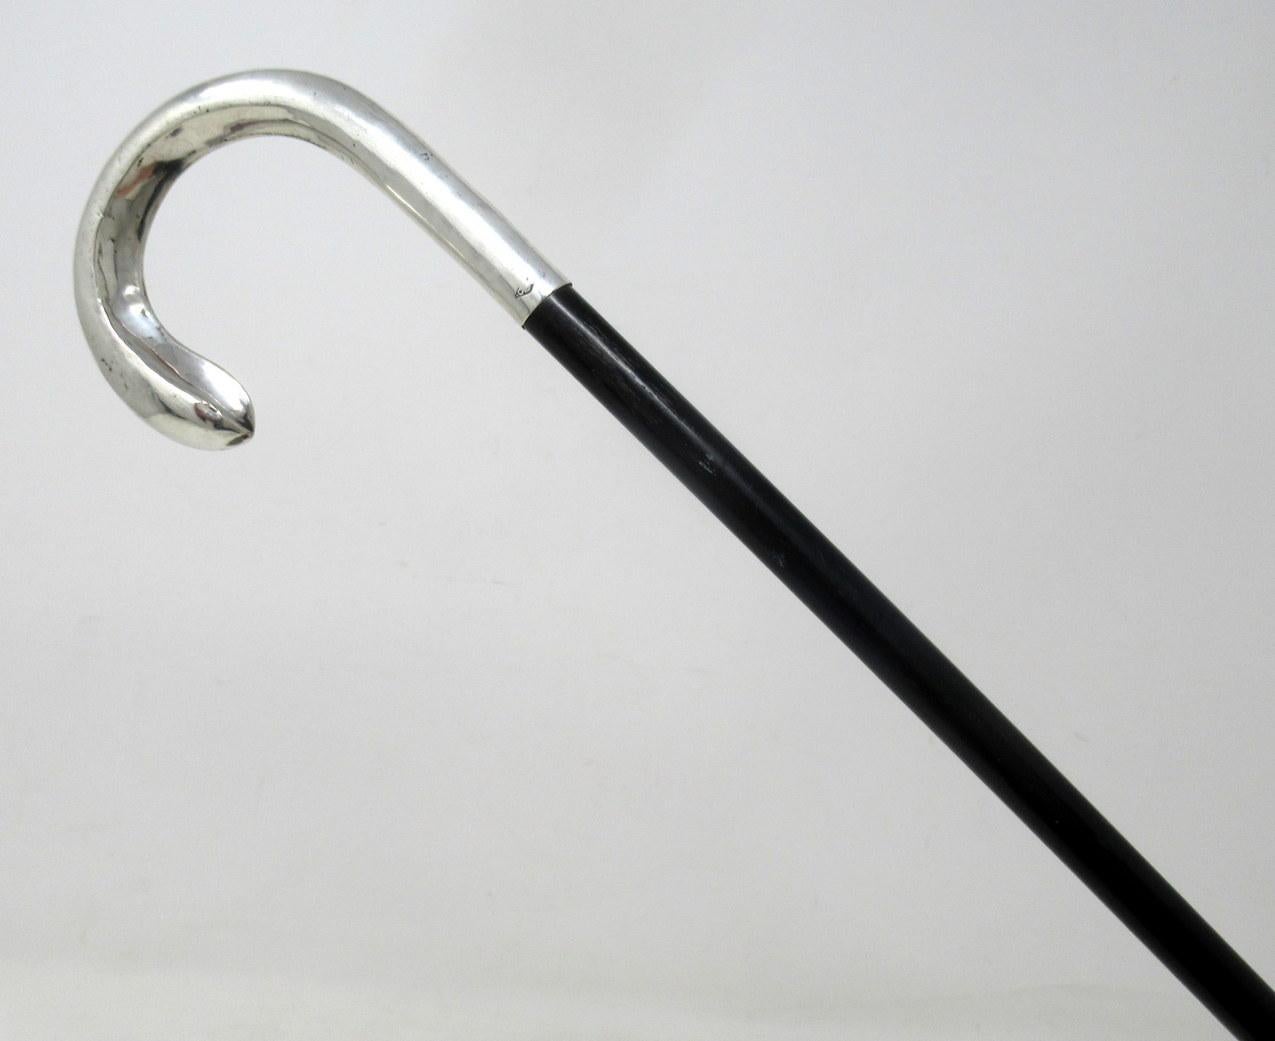 Stylish solid polished ebony and sterling silver lady’s walking stick with traditional plain cast crook shaped handle, complete with its original bi-metal polished brass and steel ferrule, which is very lightly worn from use. 

Makers Mark is